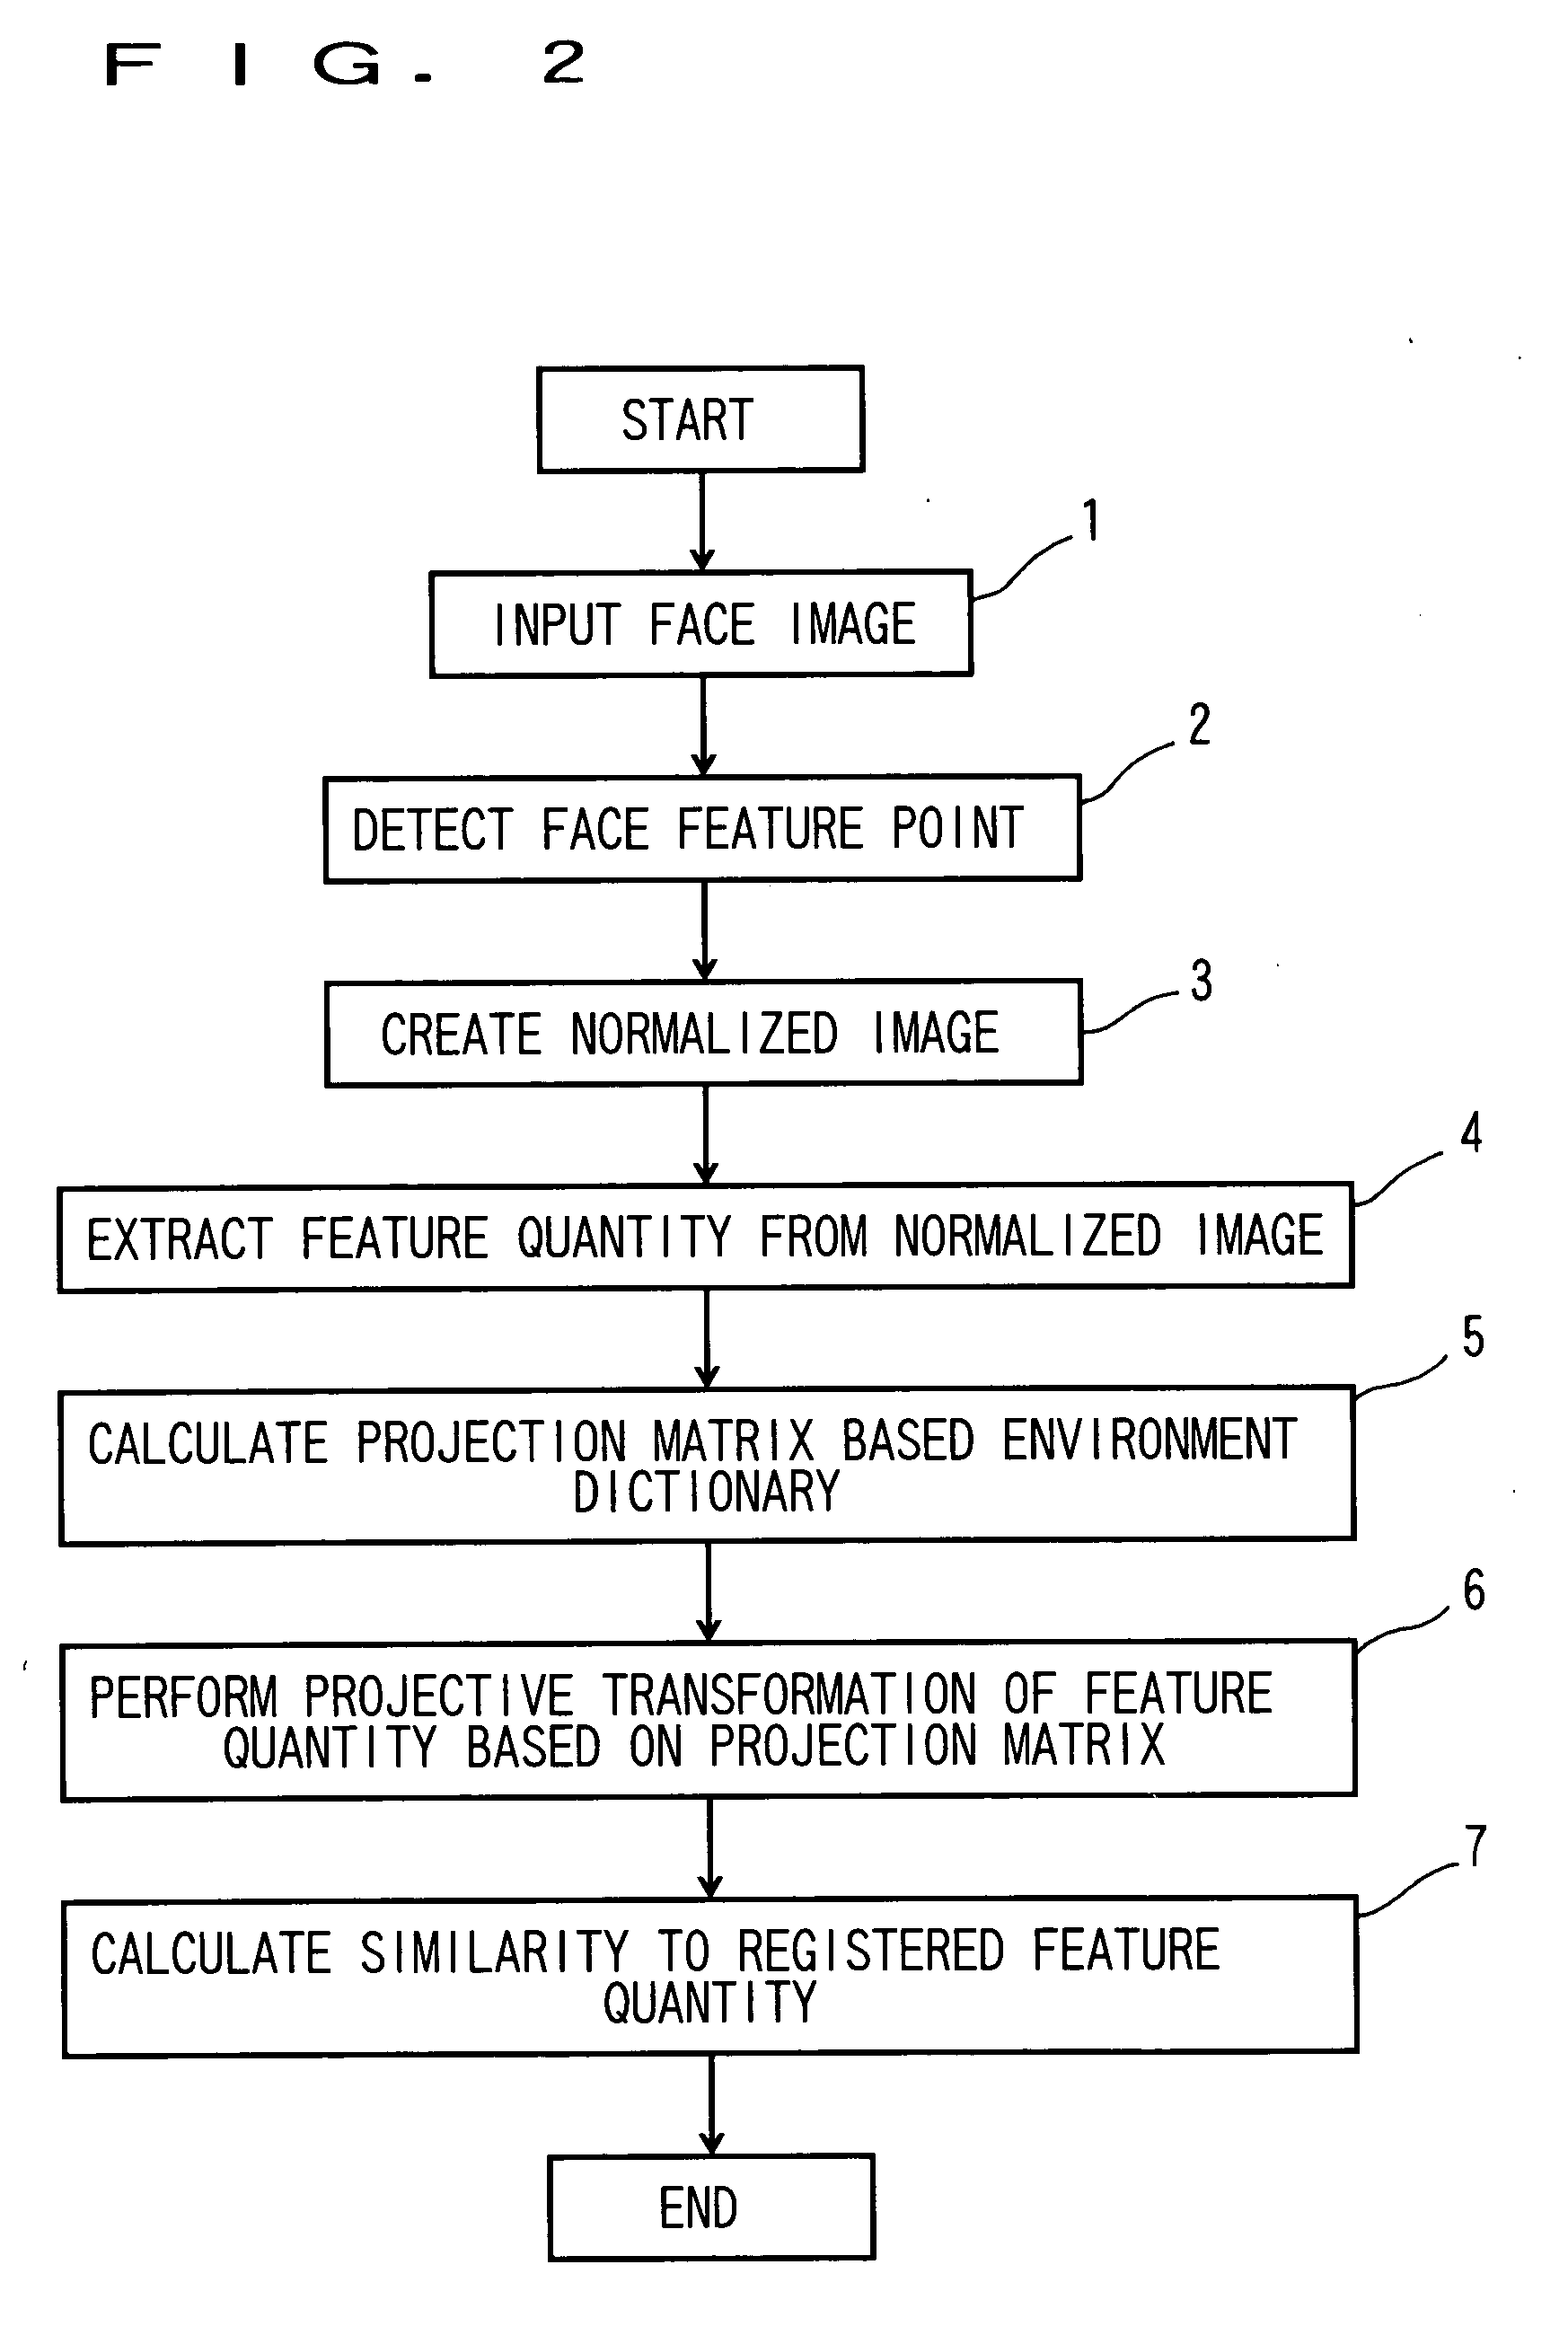 Image recognition apparatus and its method